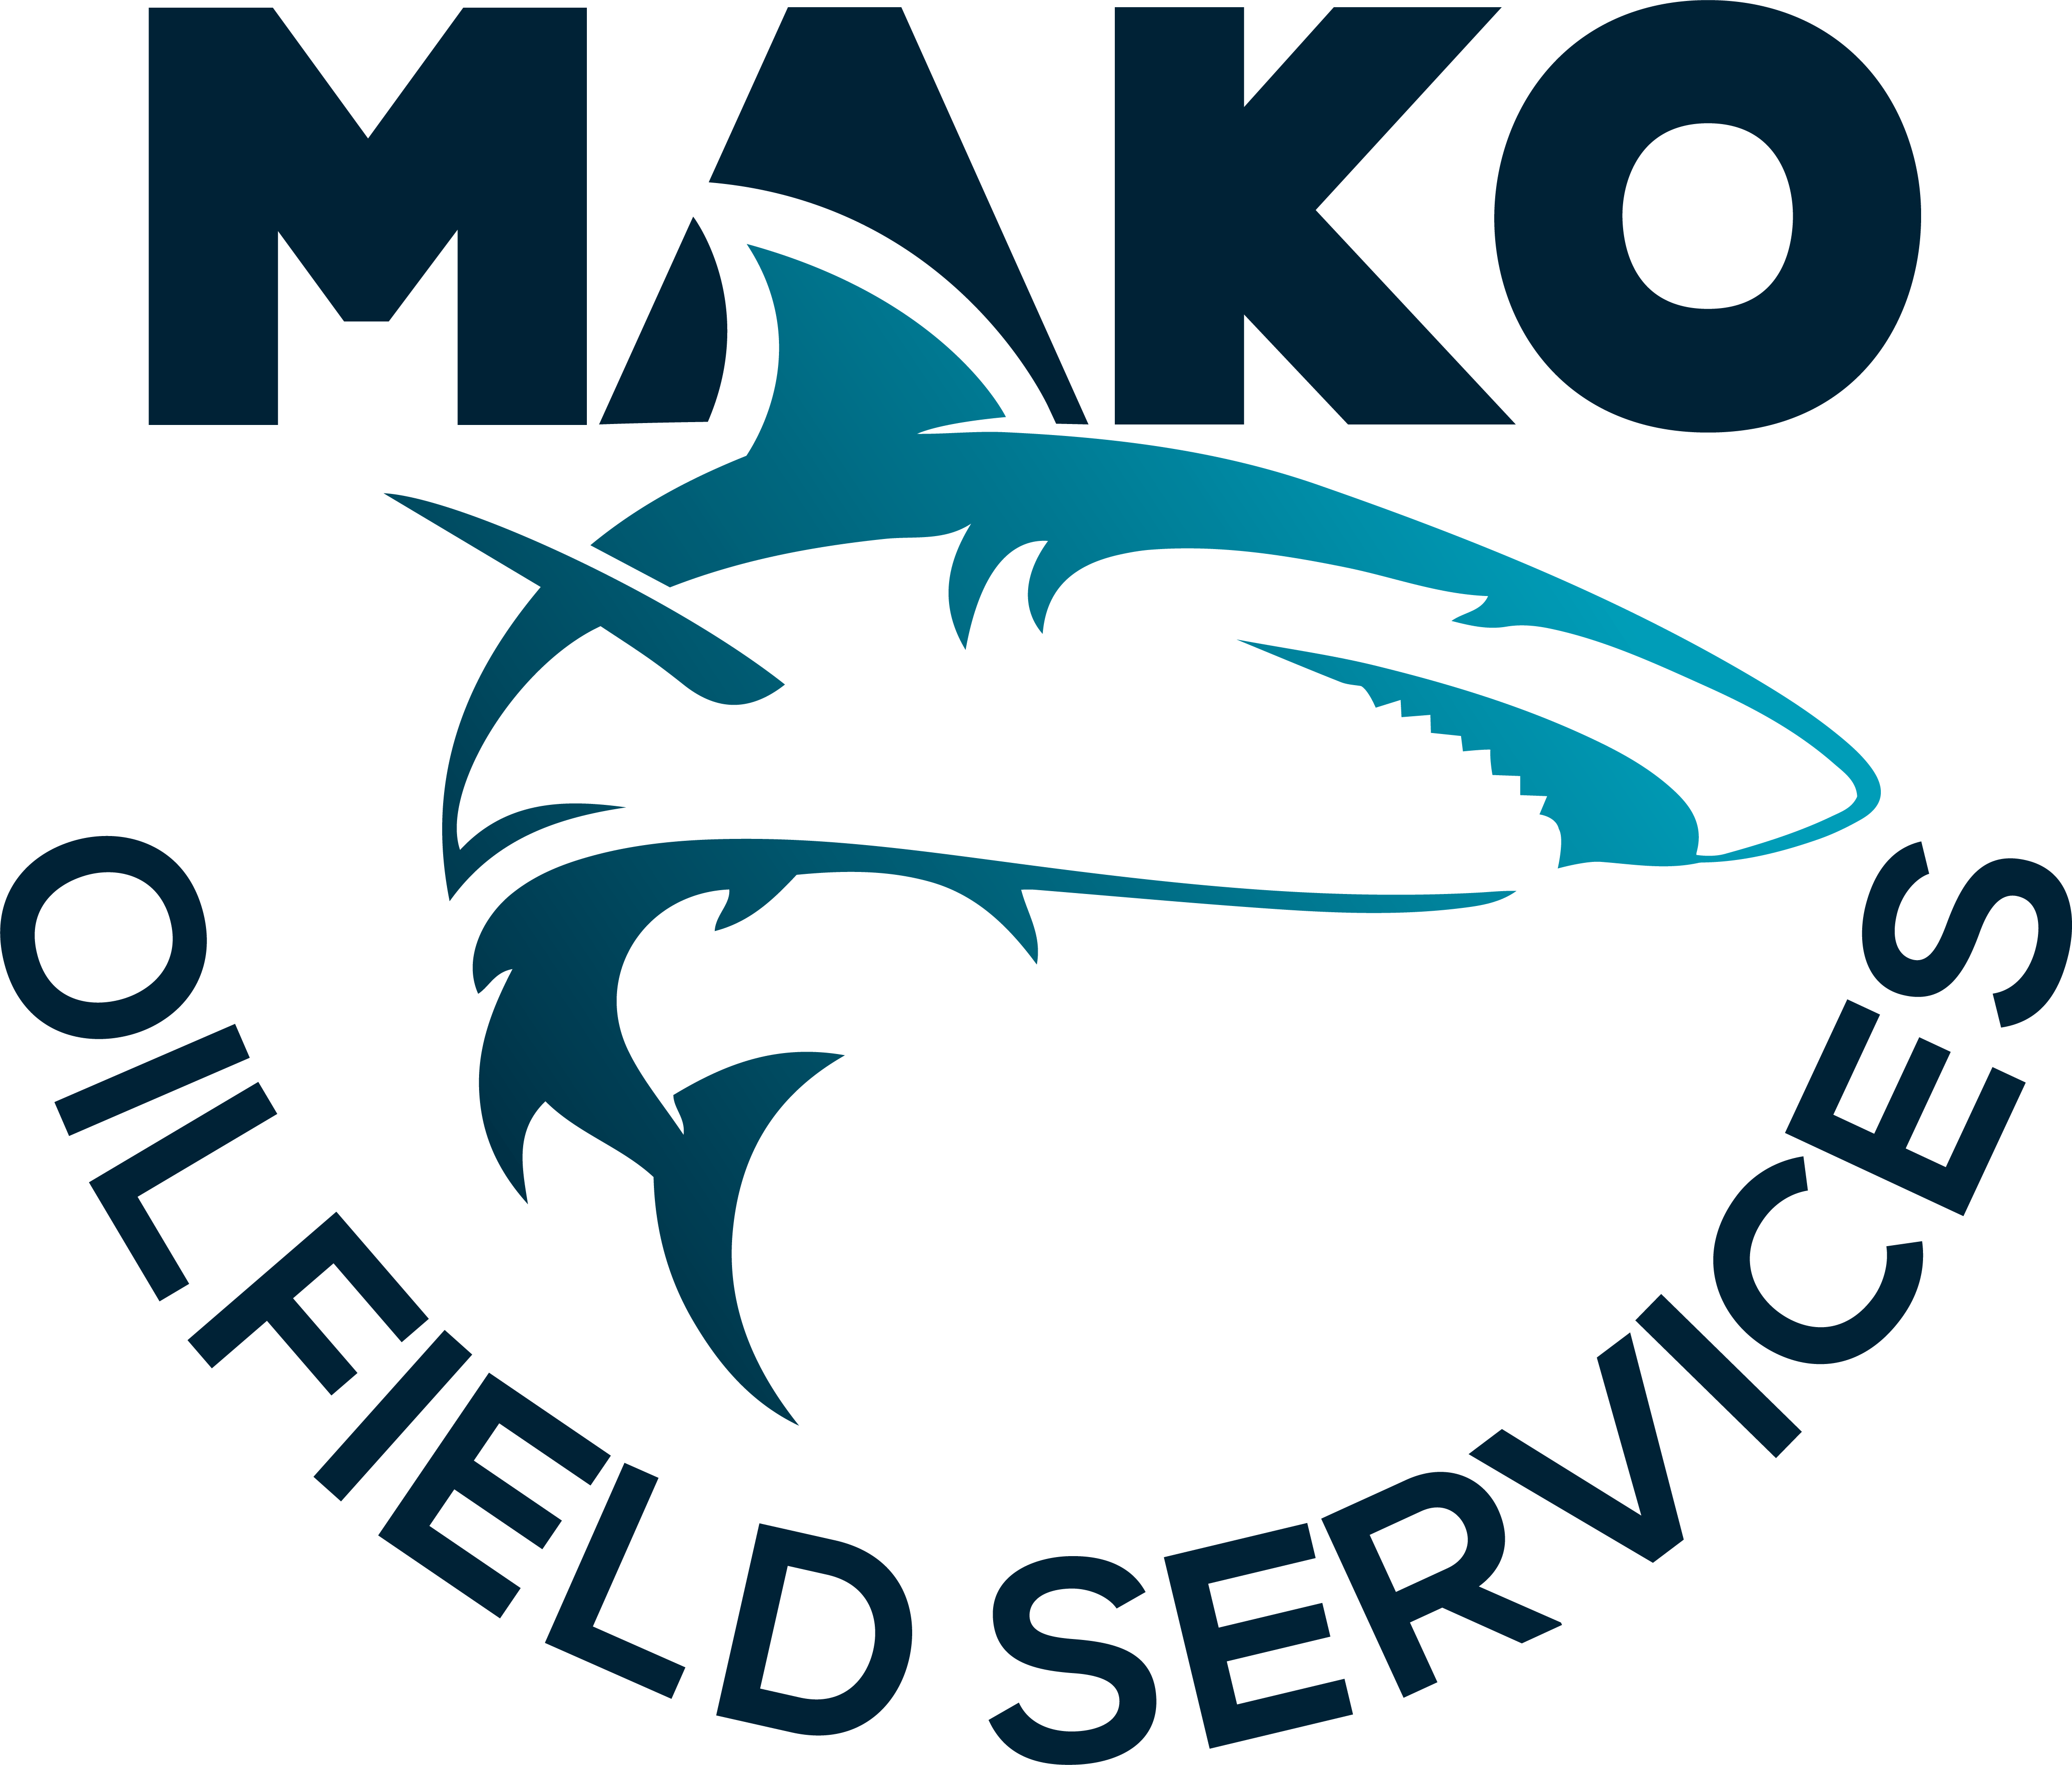 effective-april-19-2017-mako-oilfield-services-llc-mako-has-acquired-drilling-industry